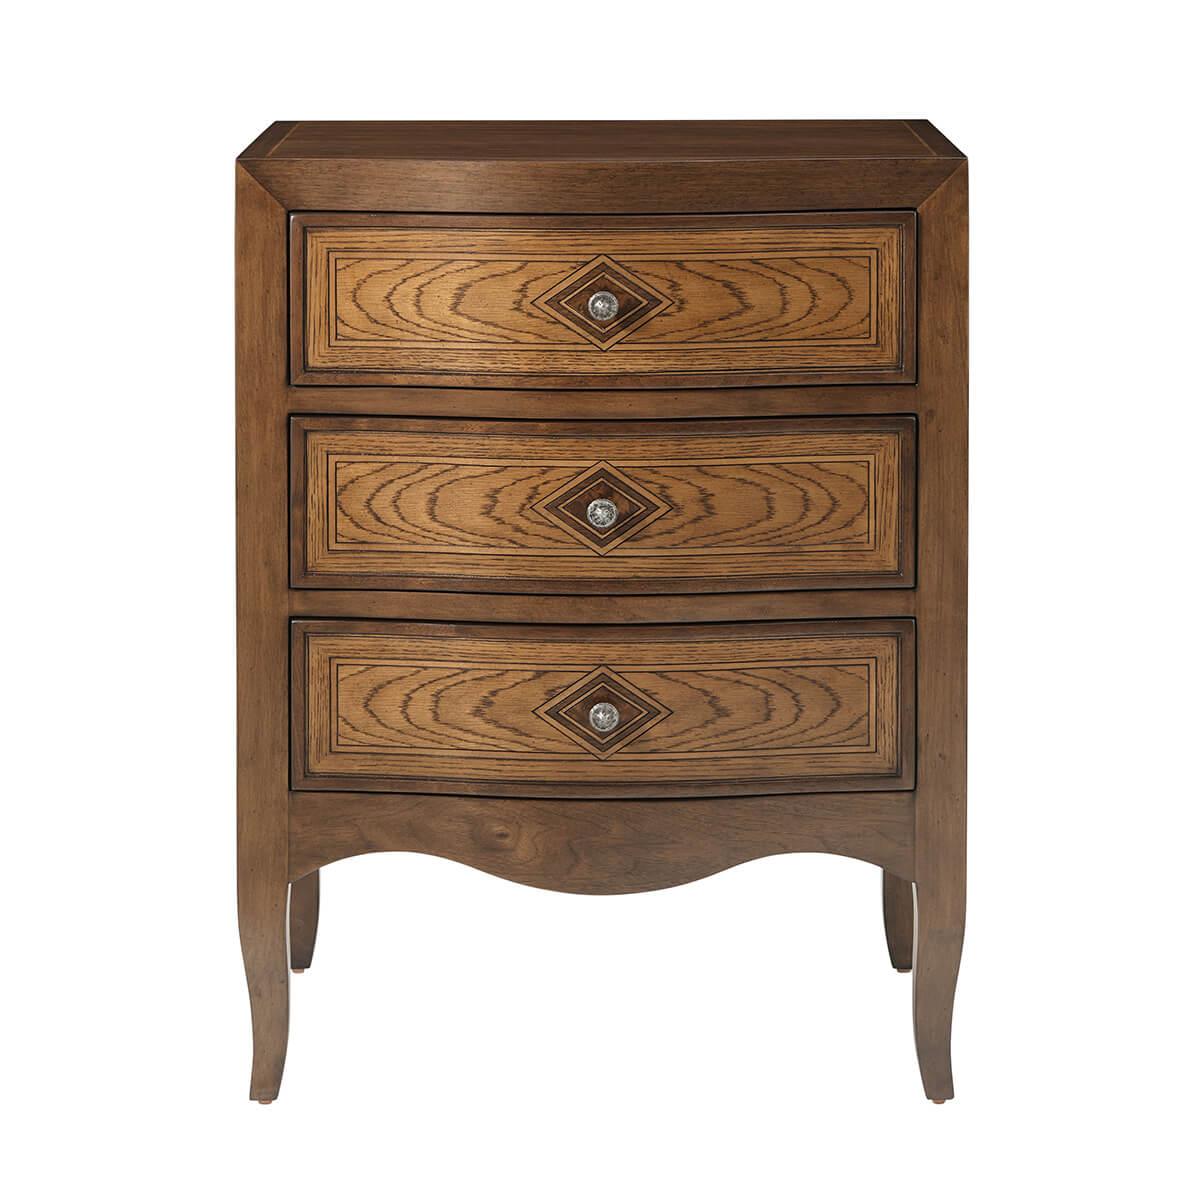 With walnut and oak parquetry with a serpentine form front, three short panel inlaid drawers with antique pewter handles. The nightstands are raised on short cabriole legs.

Dimensions: 24